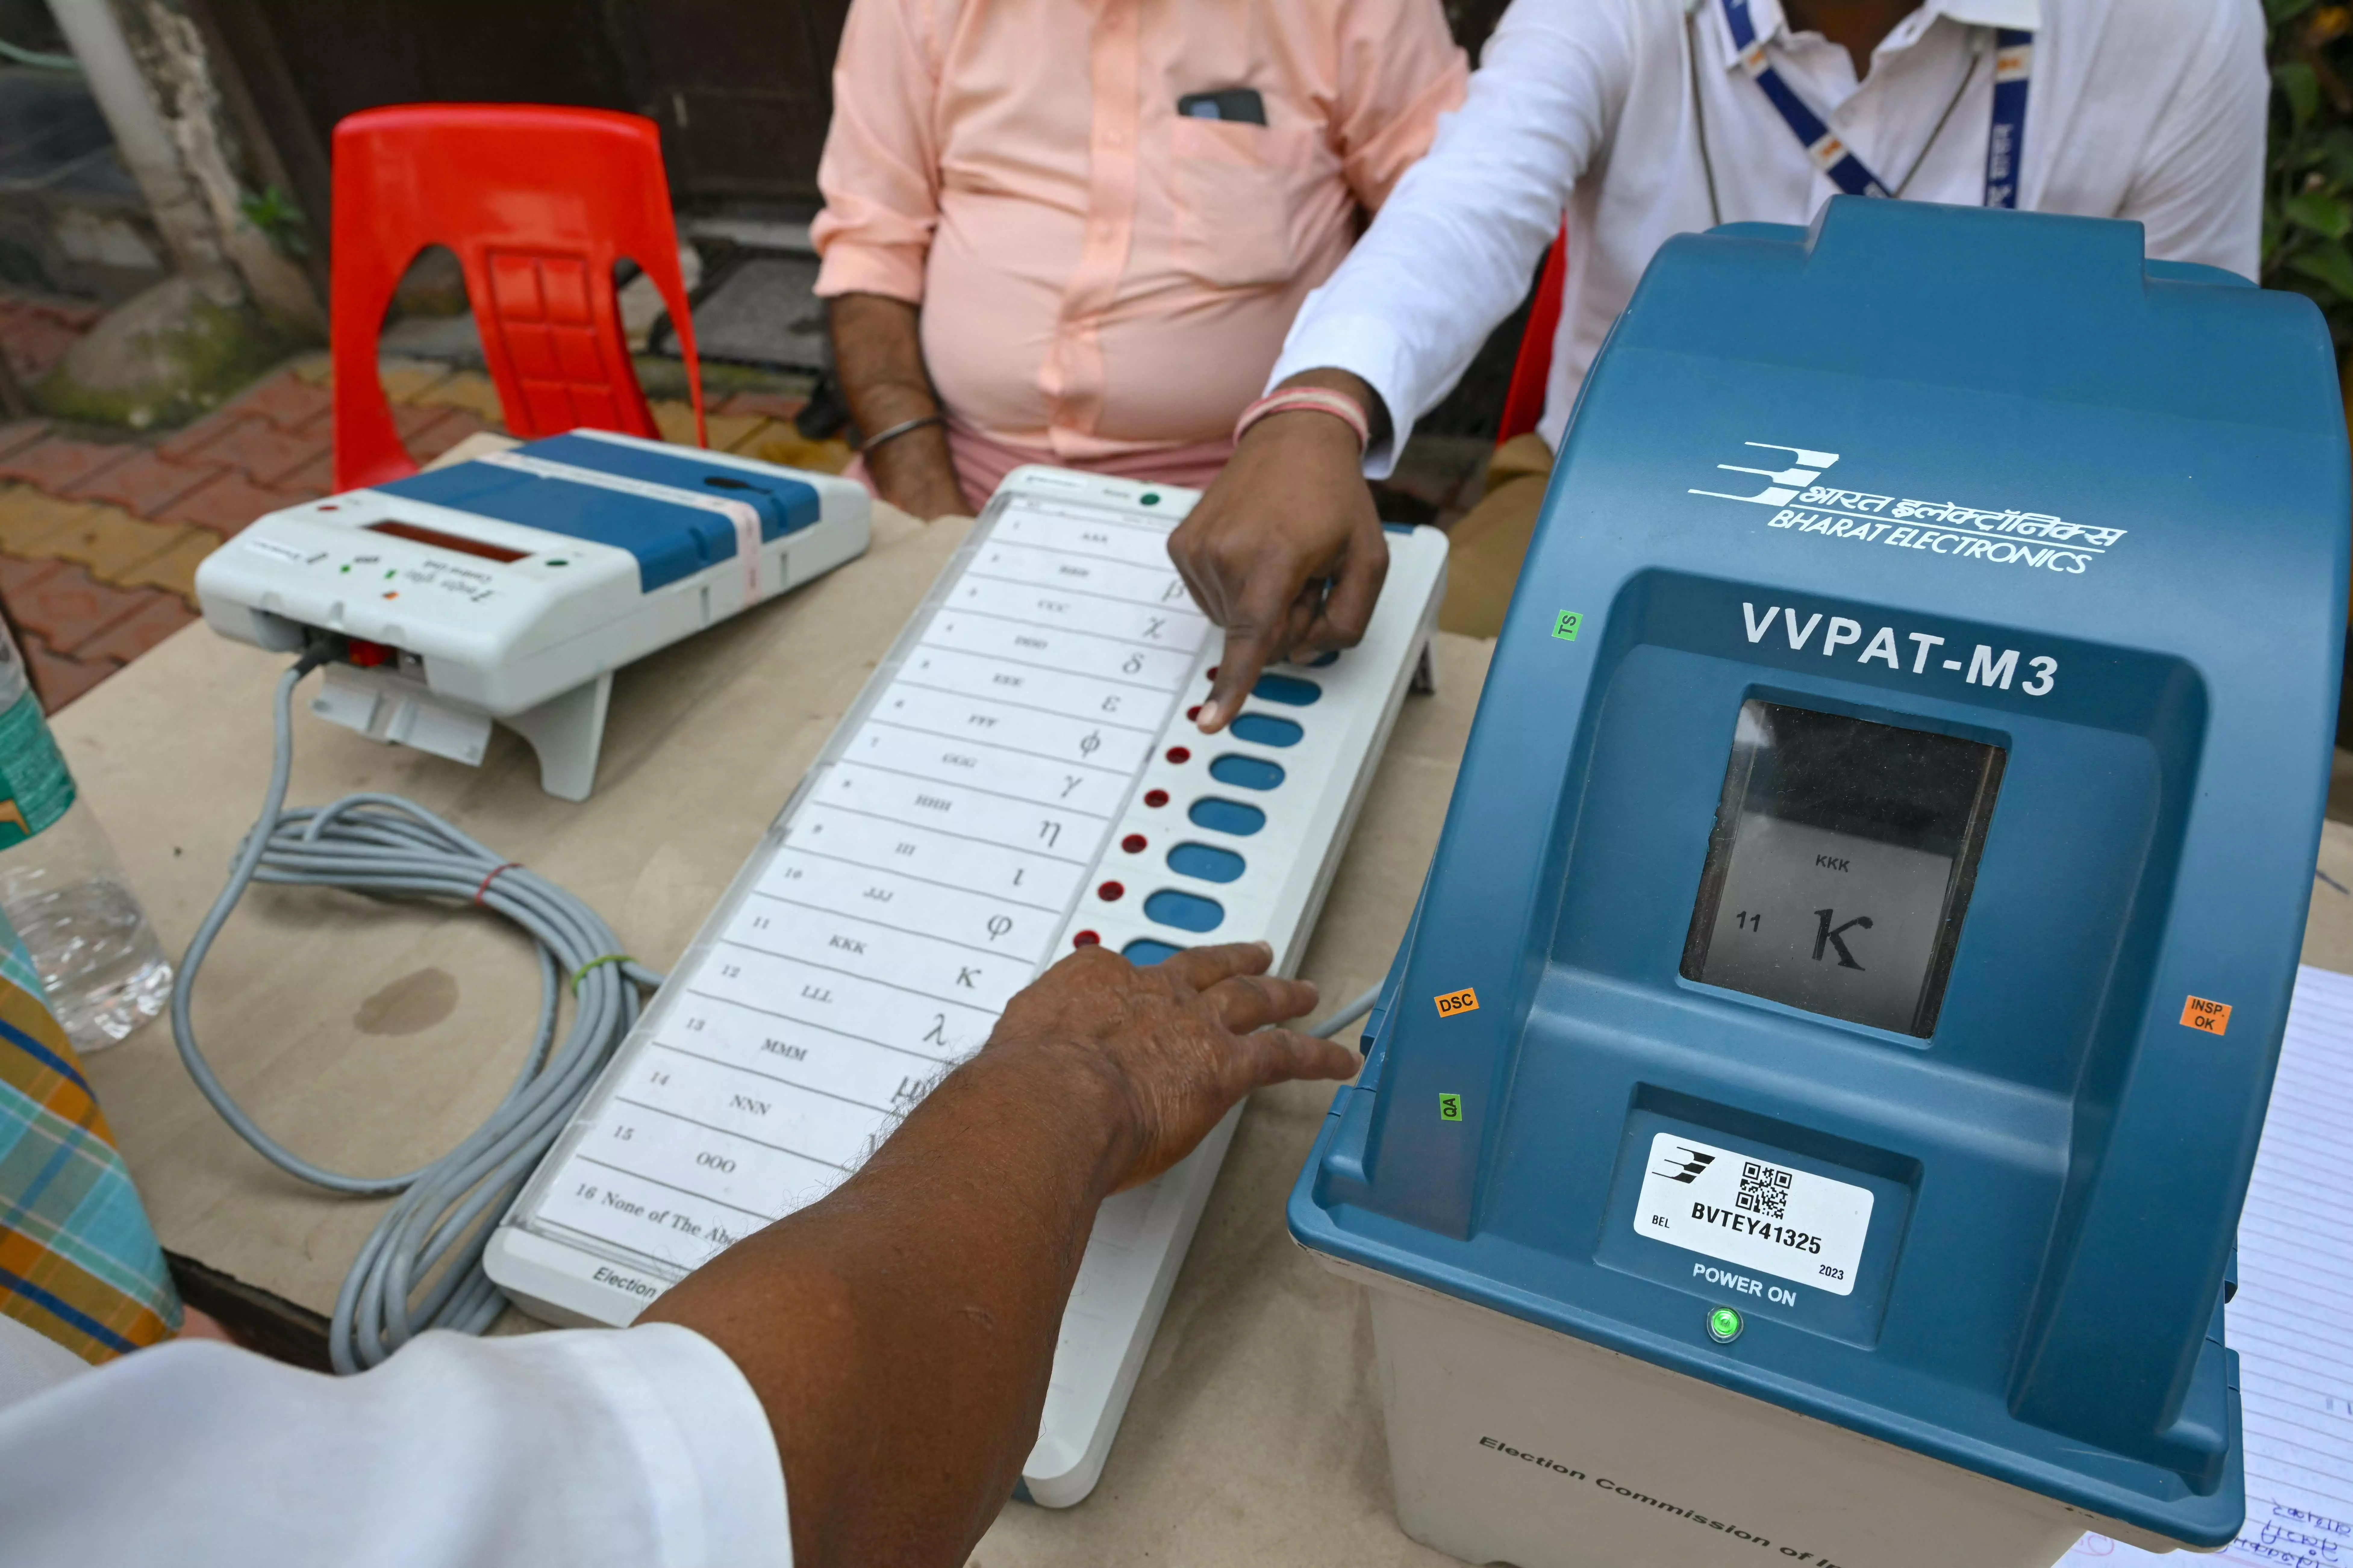 1,350 Nominations filed for Lok Sabha Polls in TS